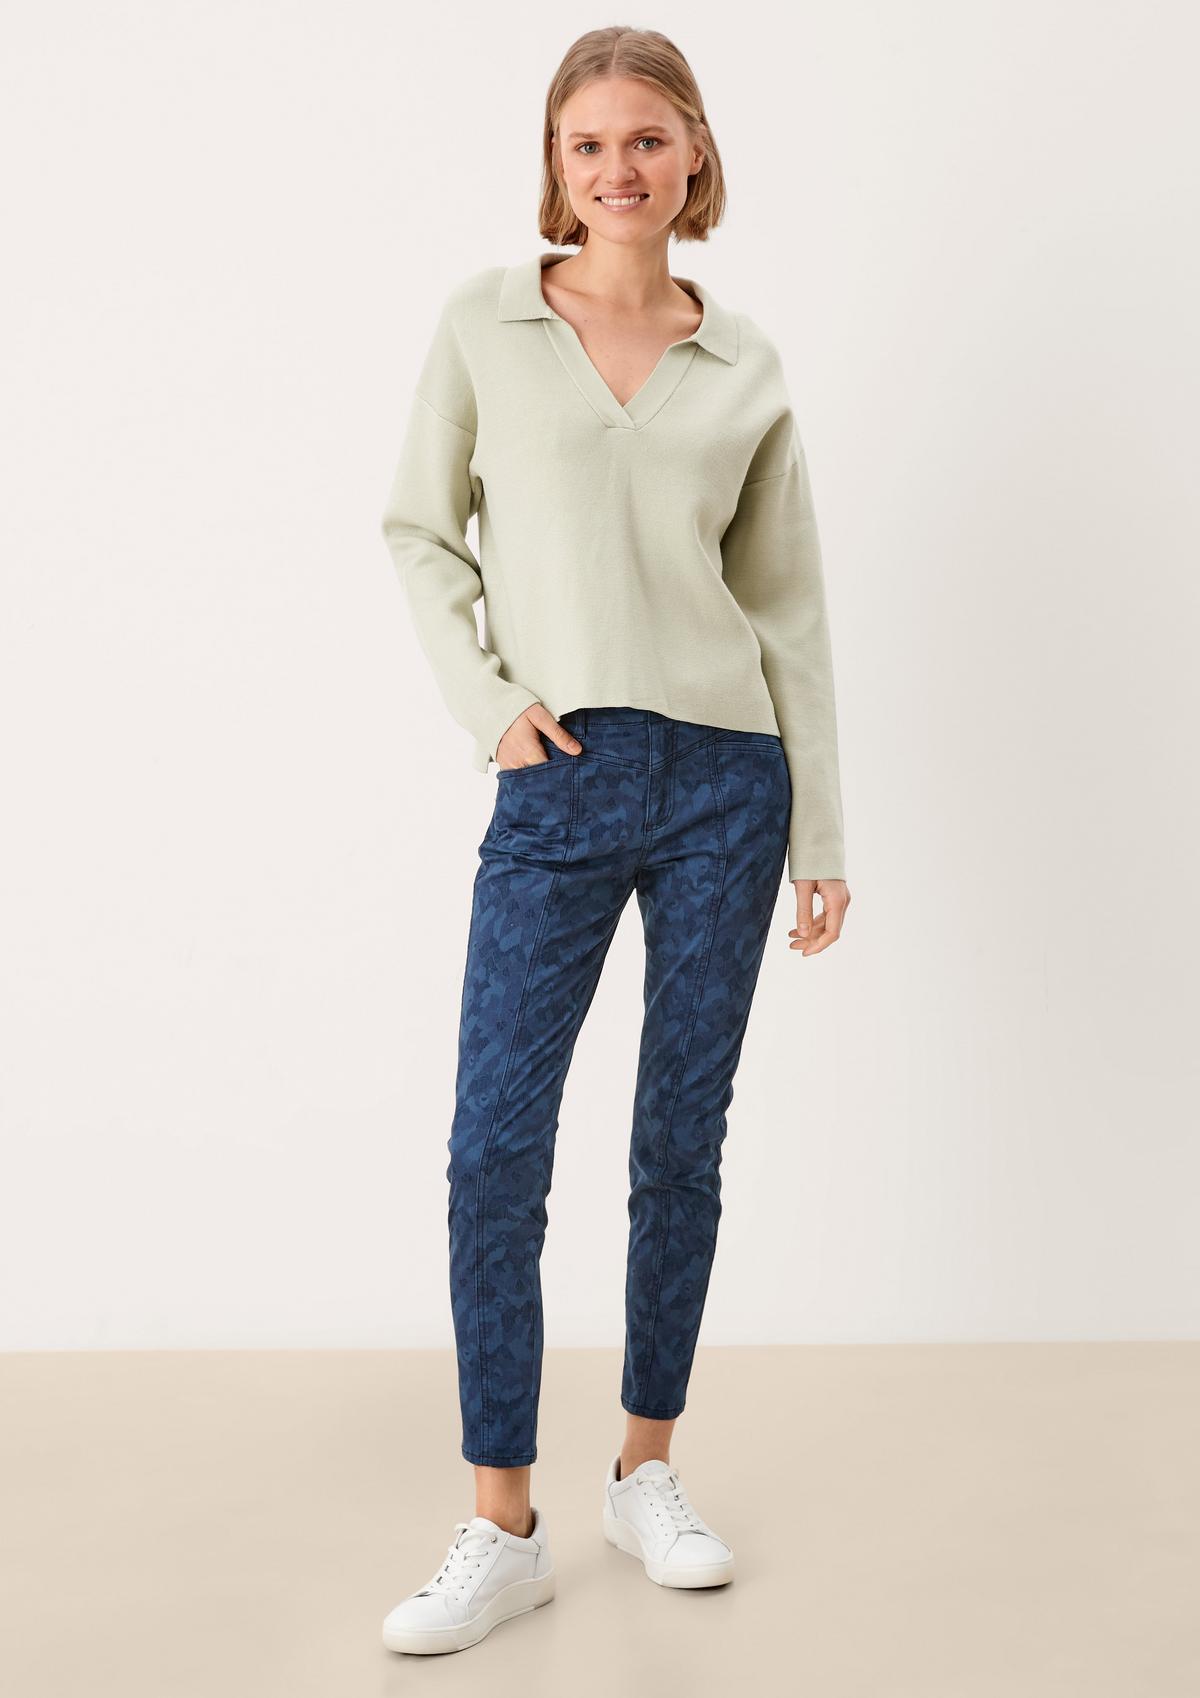 s.Oliver Slim fit: trousers with a print and a yoke waistband